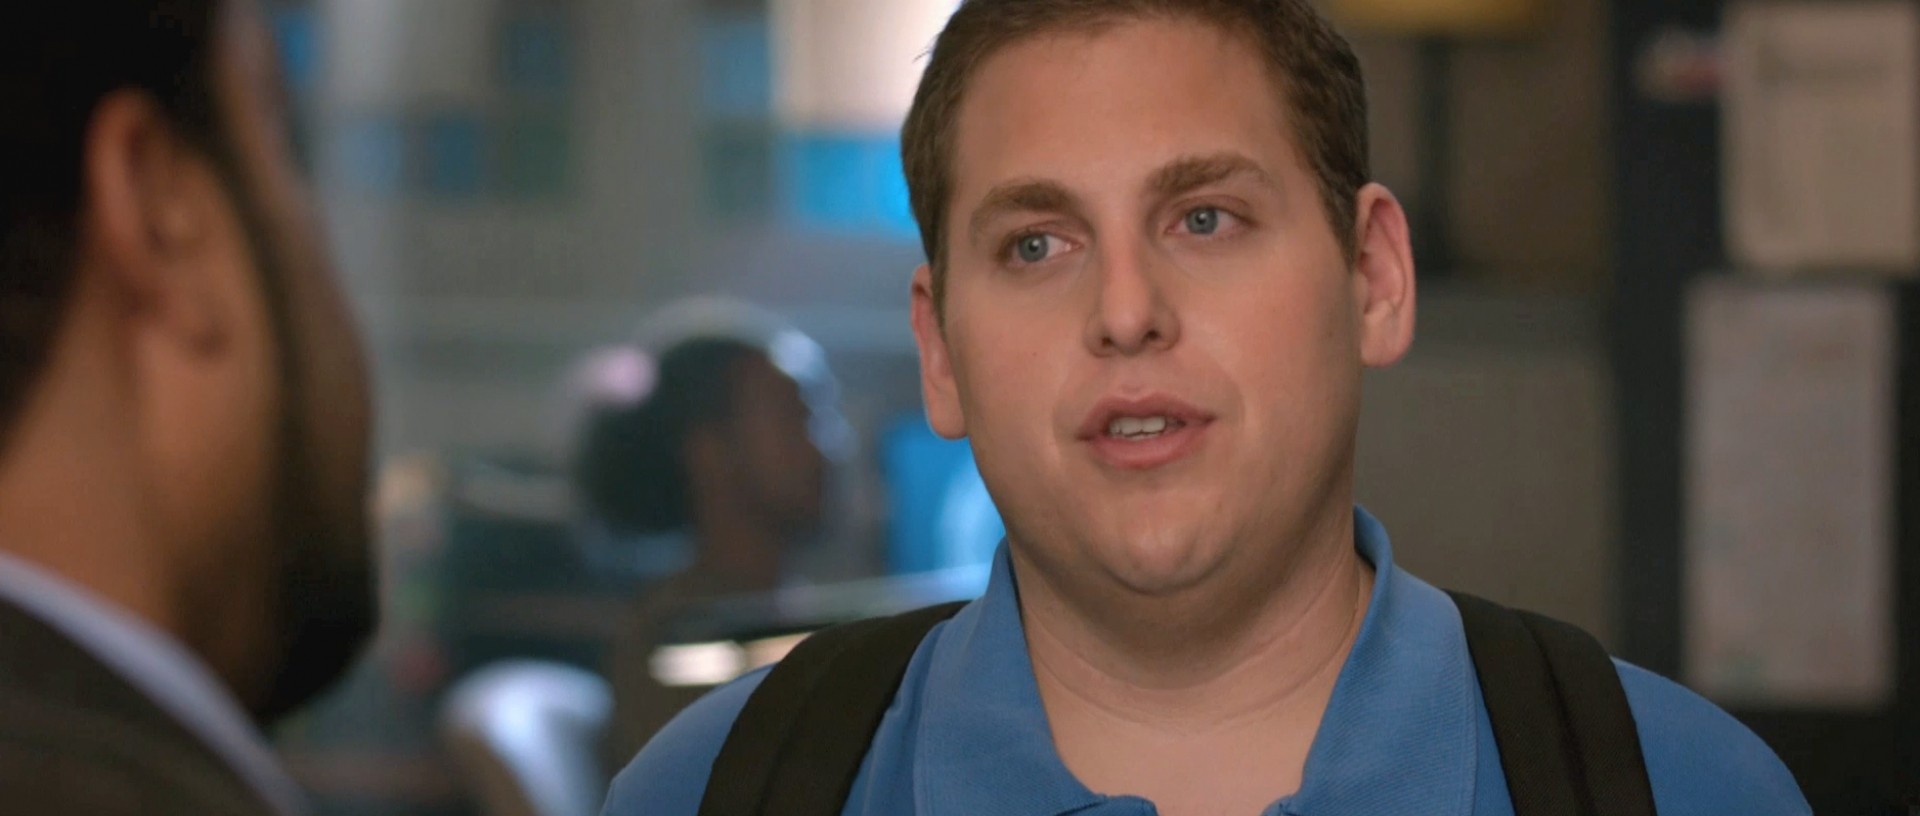 The Batman: How Jonah Hill Could Look Like As The Penguin